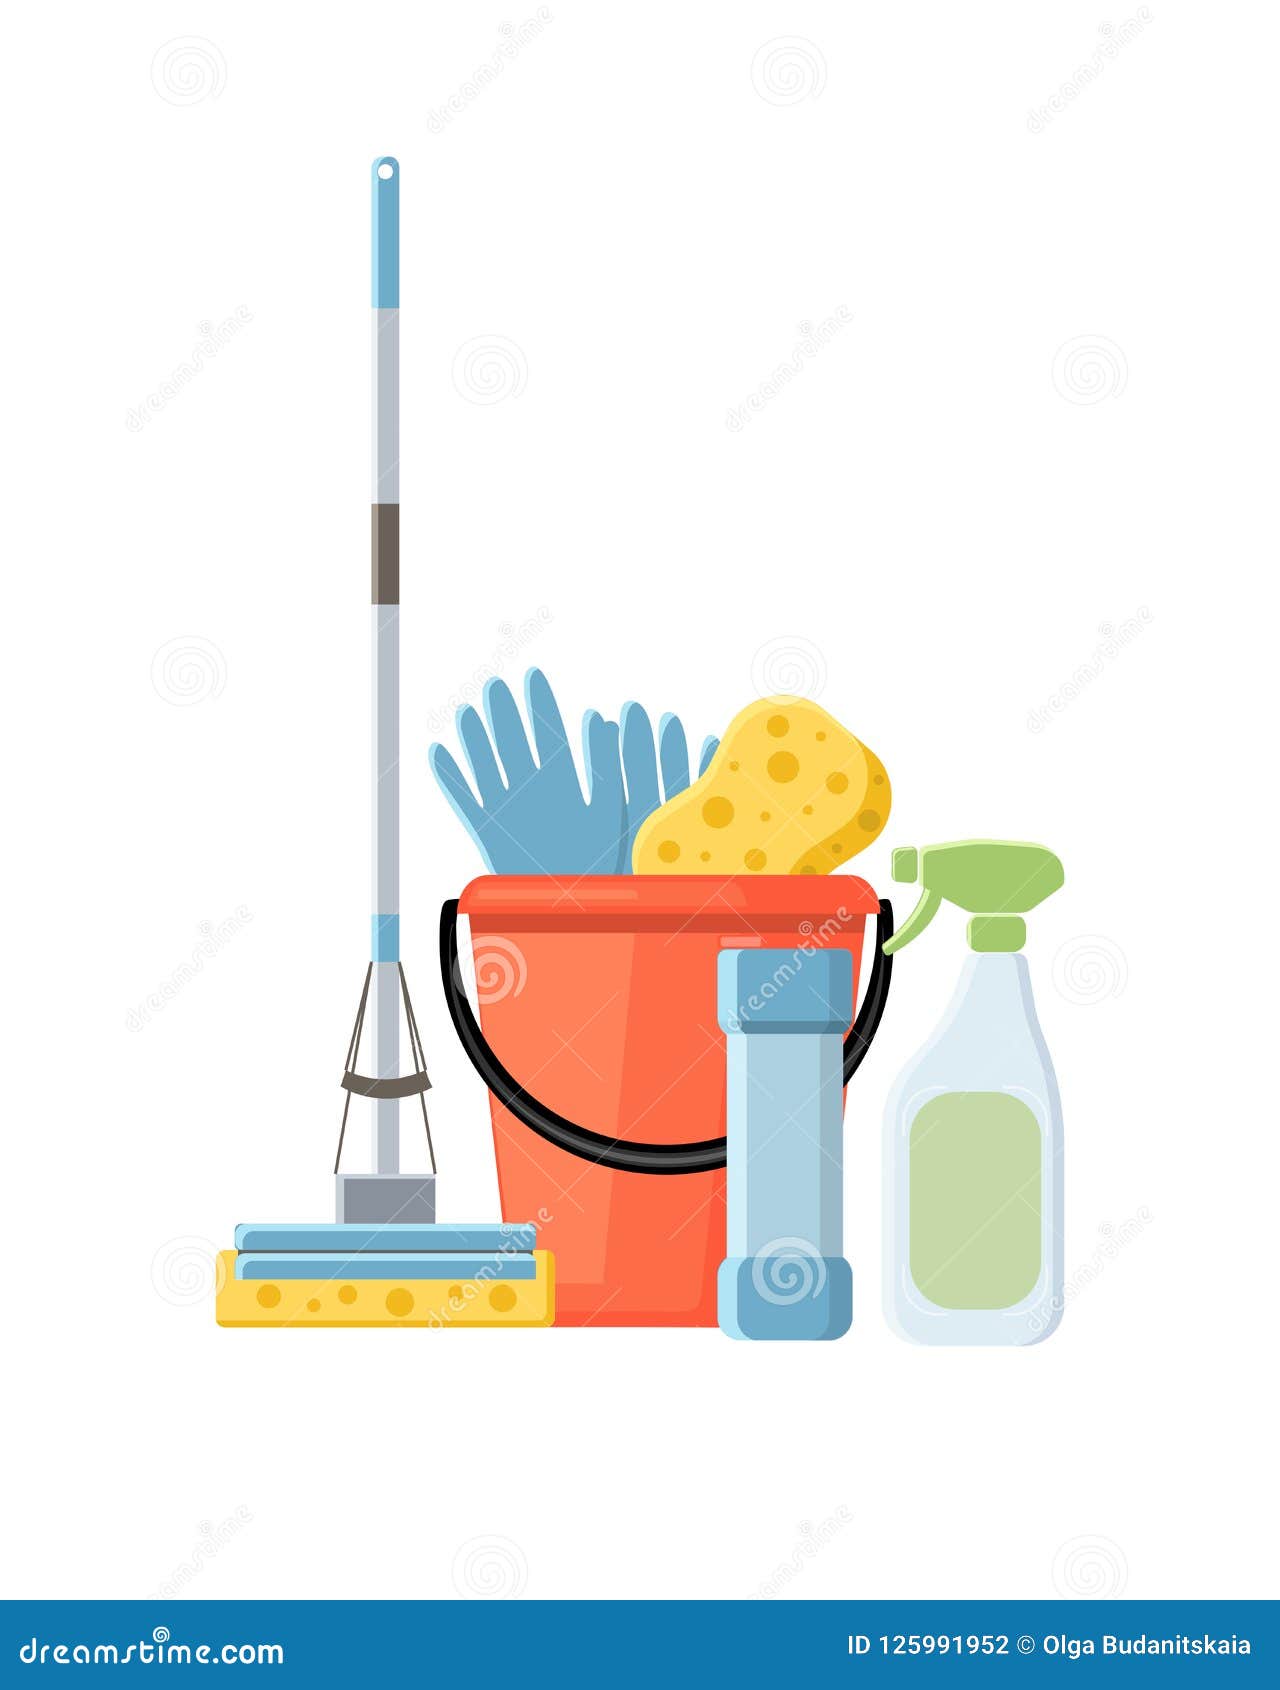 https://thumbs.dreamstime.com/z/cleaning-supplies-flat-cartoon-style-vector-illustration-isolated-white-background-cleaning-supplies-flat-cartoon-style-125991952.jpg